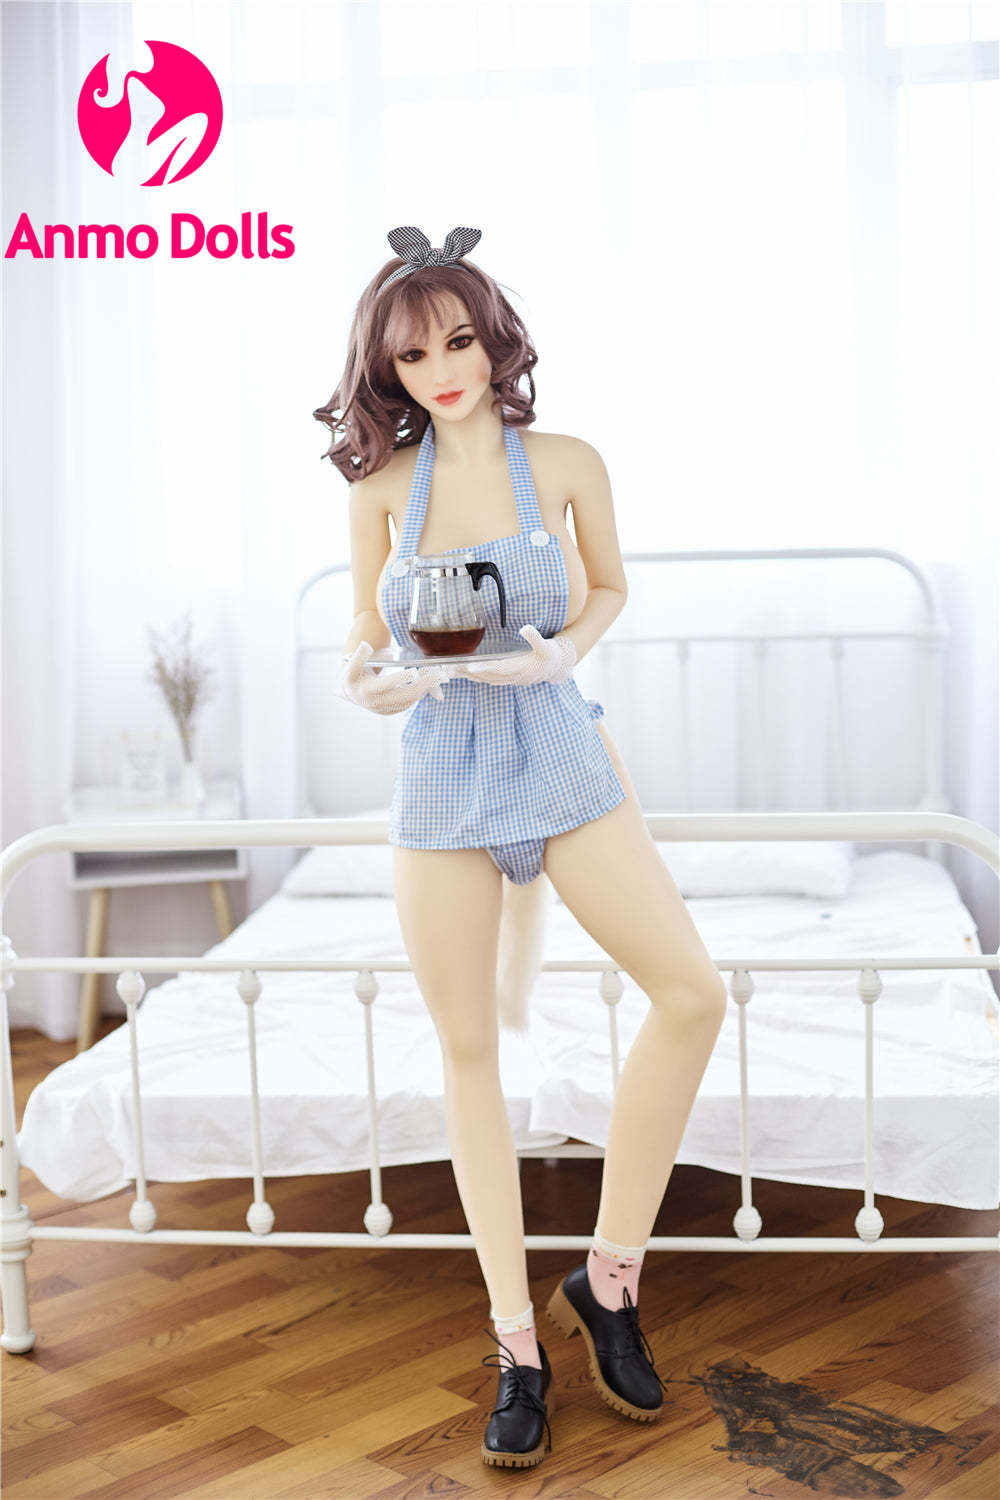 Samara - Sex doll plays with sex toys missing real Penis - TPE Sex Doll by Anmodolls